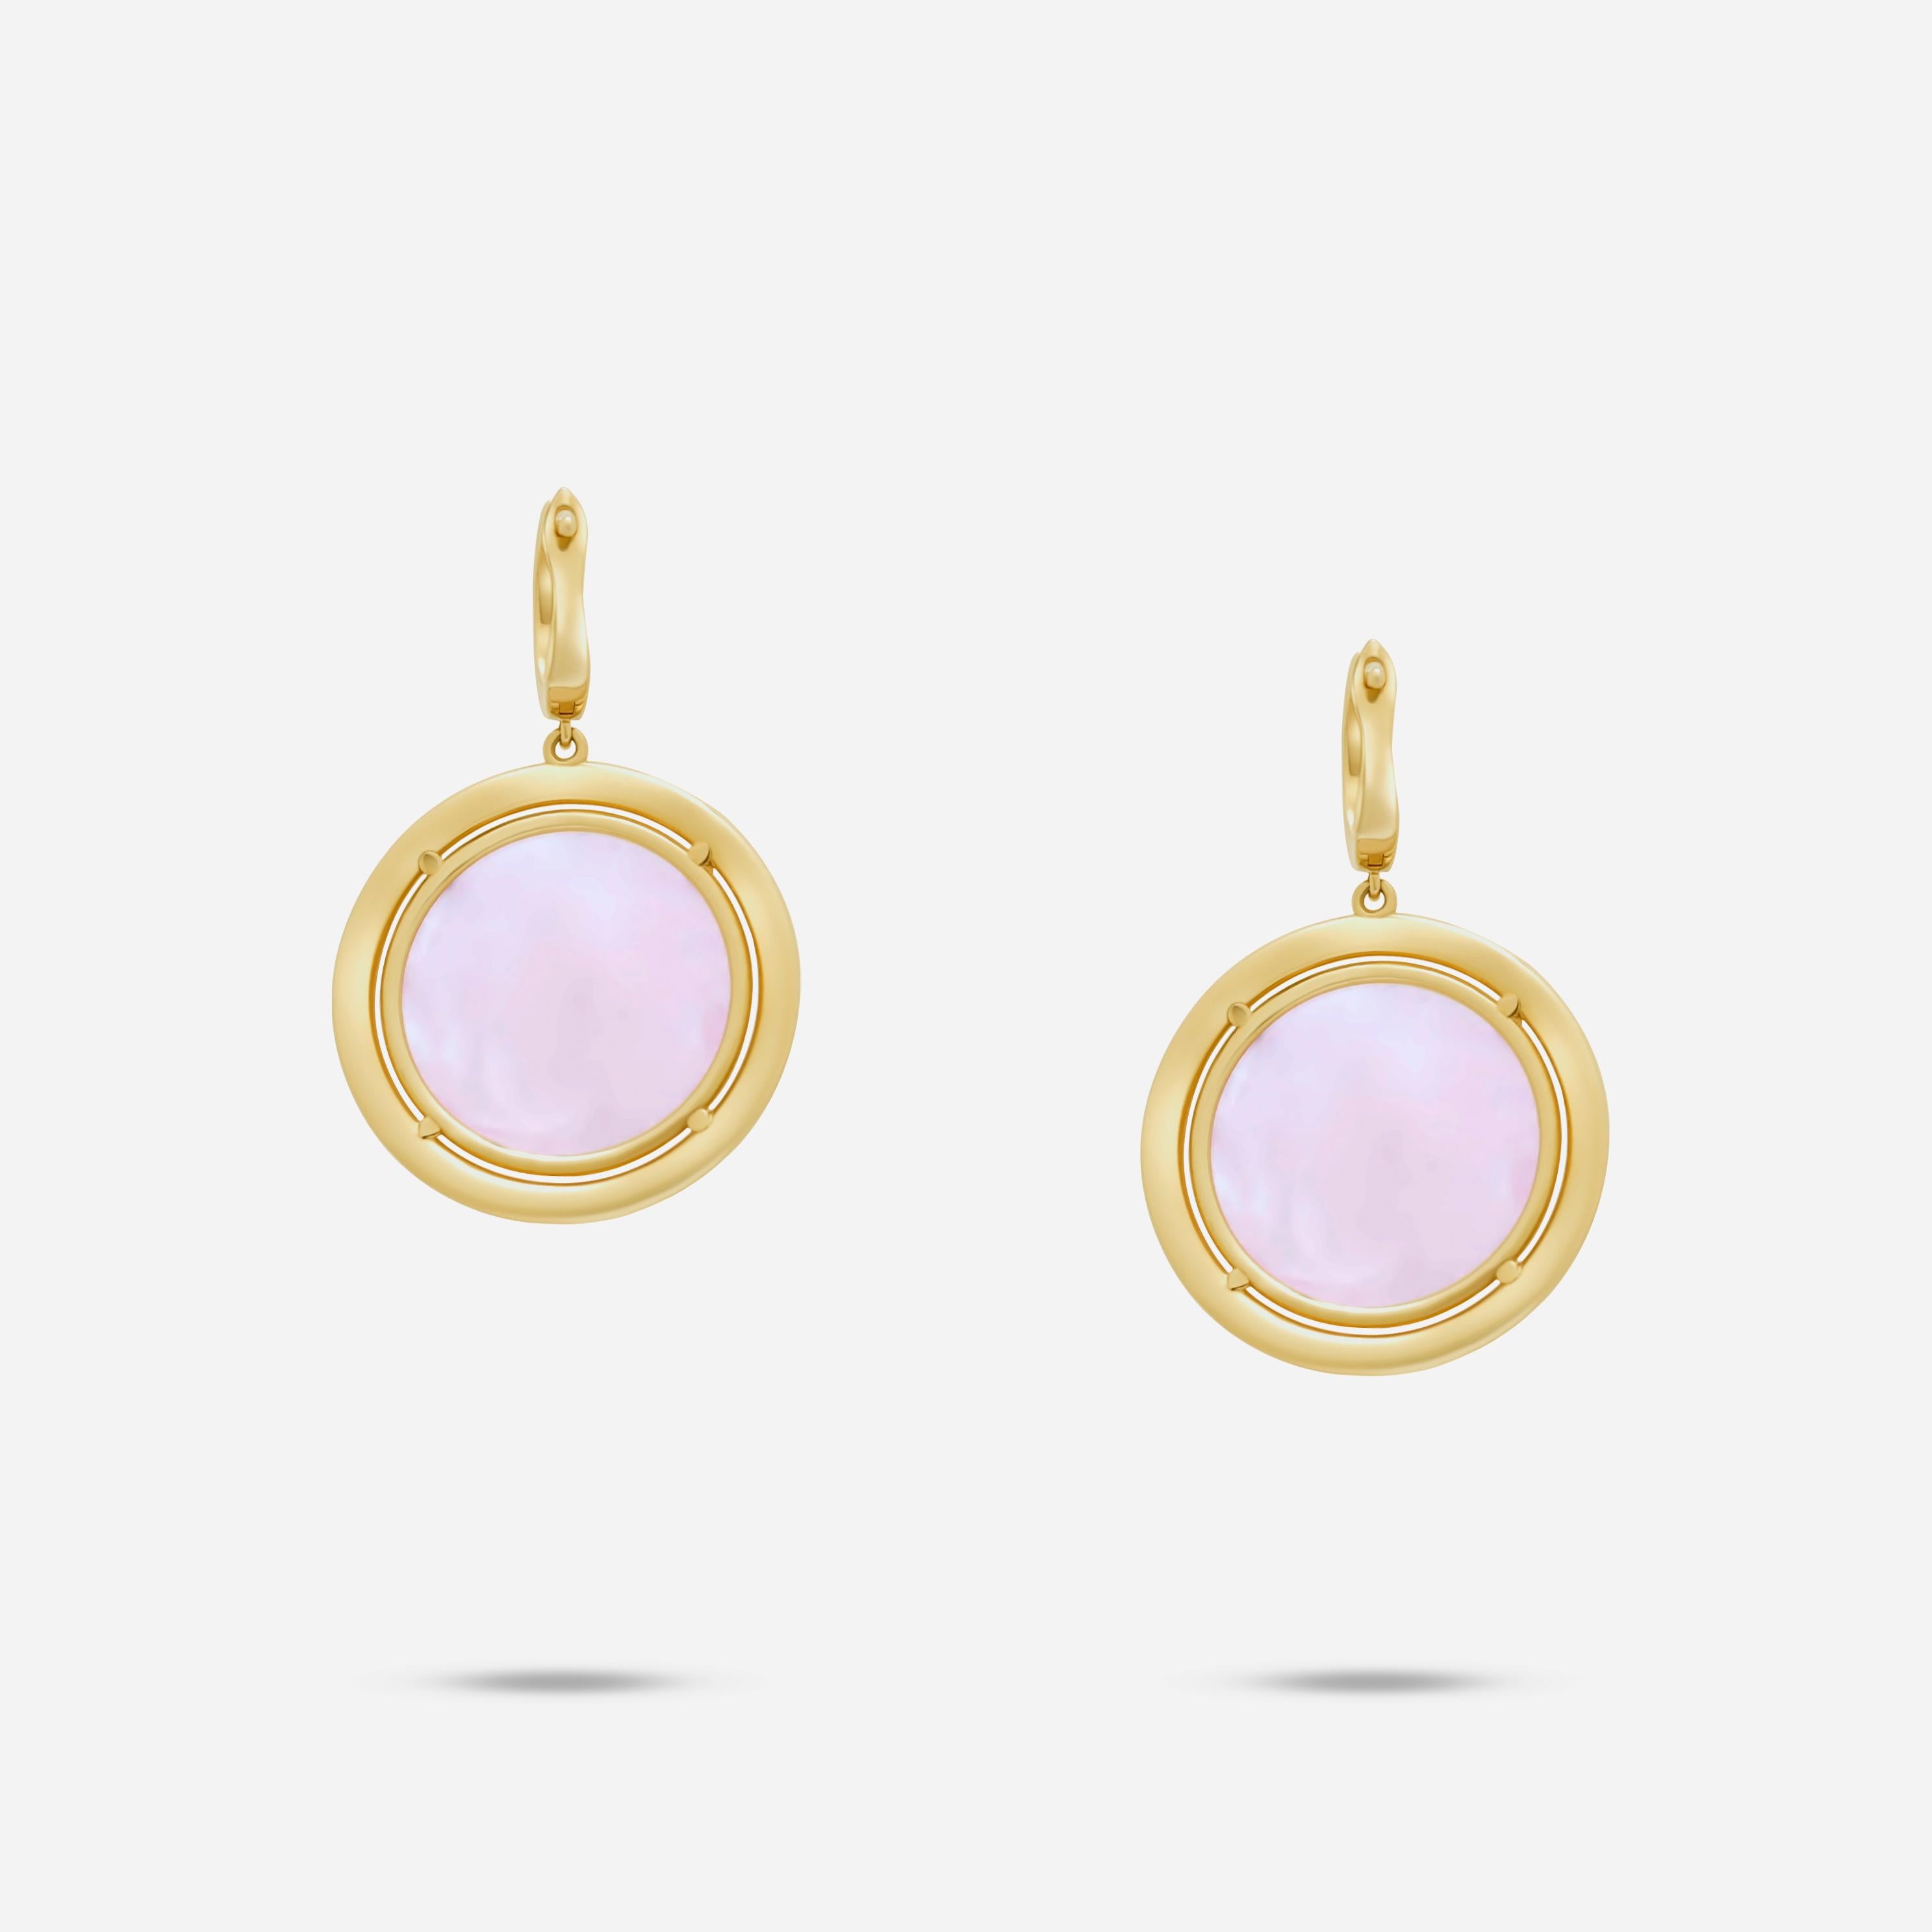 Peach Pink Rutilated Quartz Round Cabochon Diamonds Halo Drop 14K Gold Earrings
14 Karat Yellow Gold
2.00 CT Diamonds
Peach Pink Rutilated Quartz Round Cabochon Gemstones

Important Information:
Please note that this item will take 2-4 weeks to